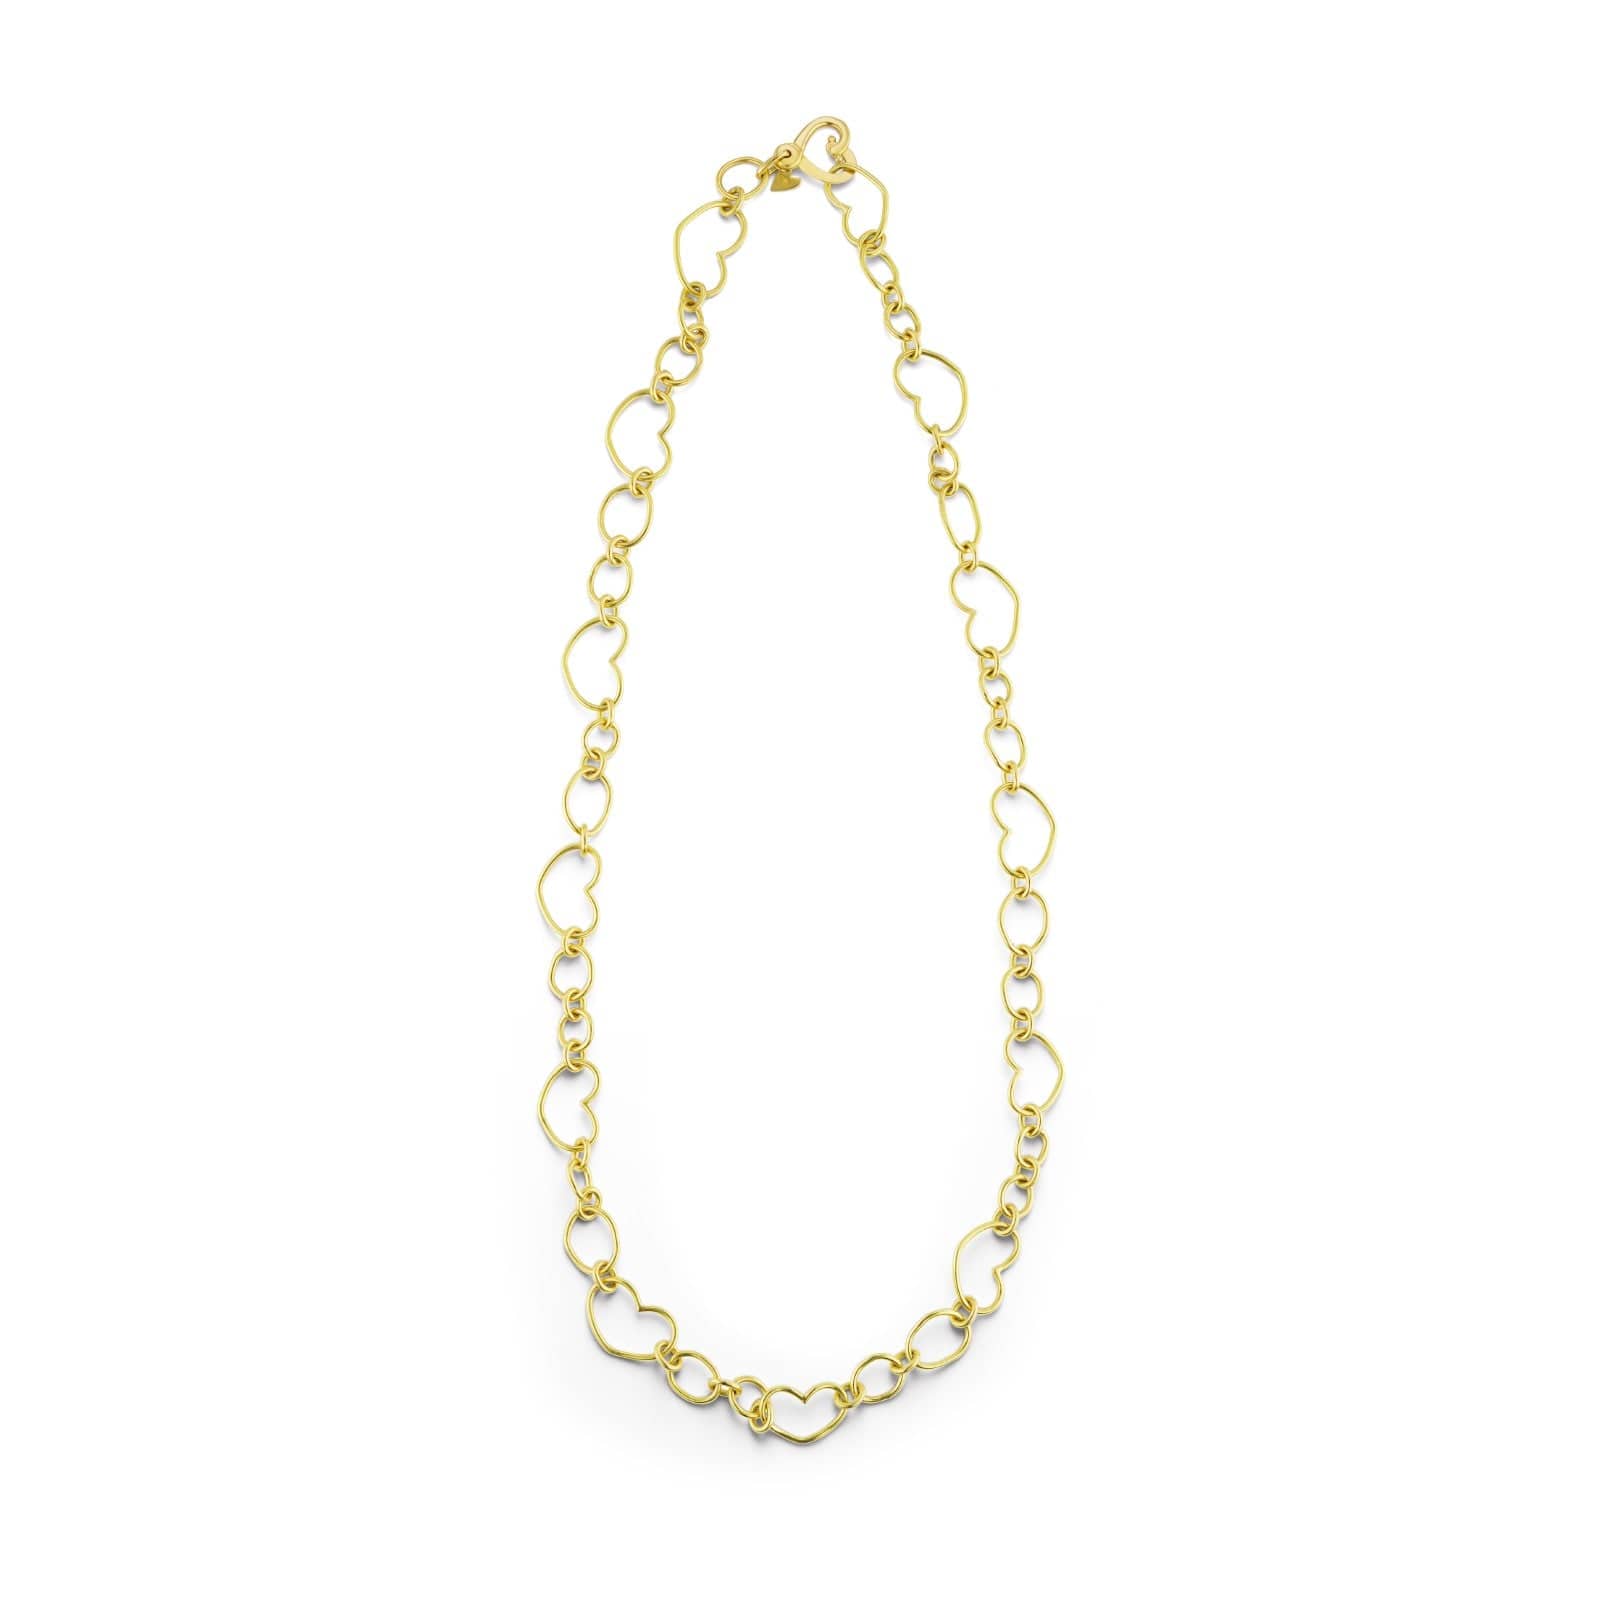 18K Yellow Gold Heart Chain Link Necklace